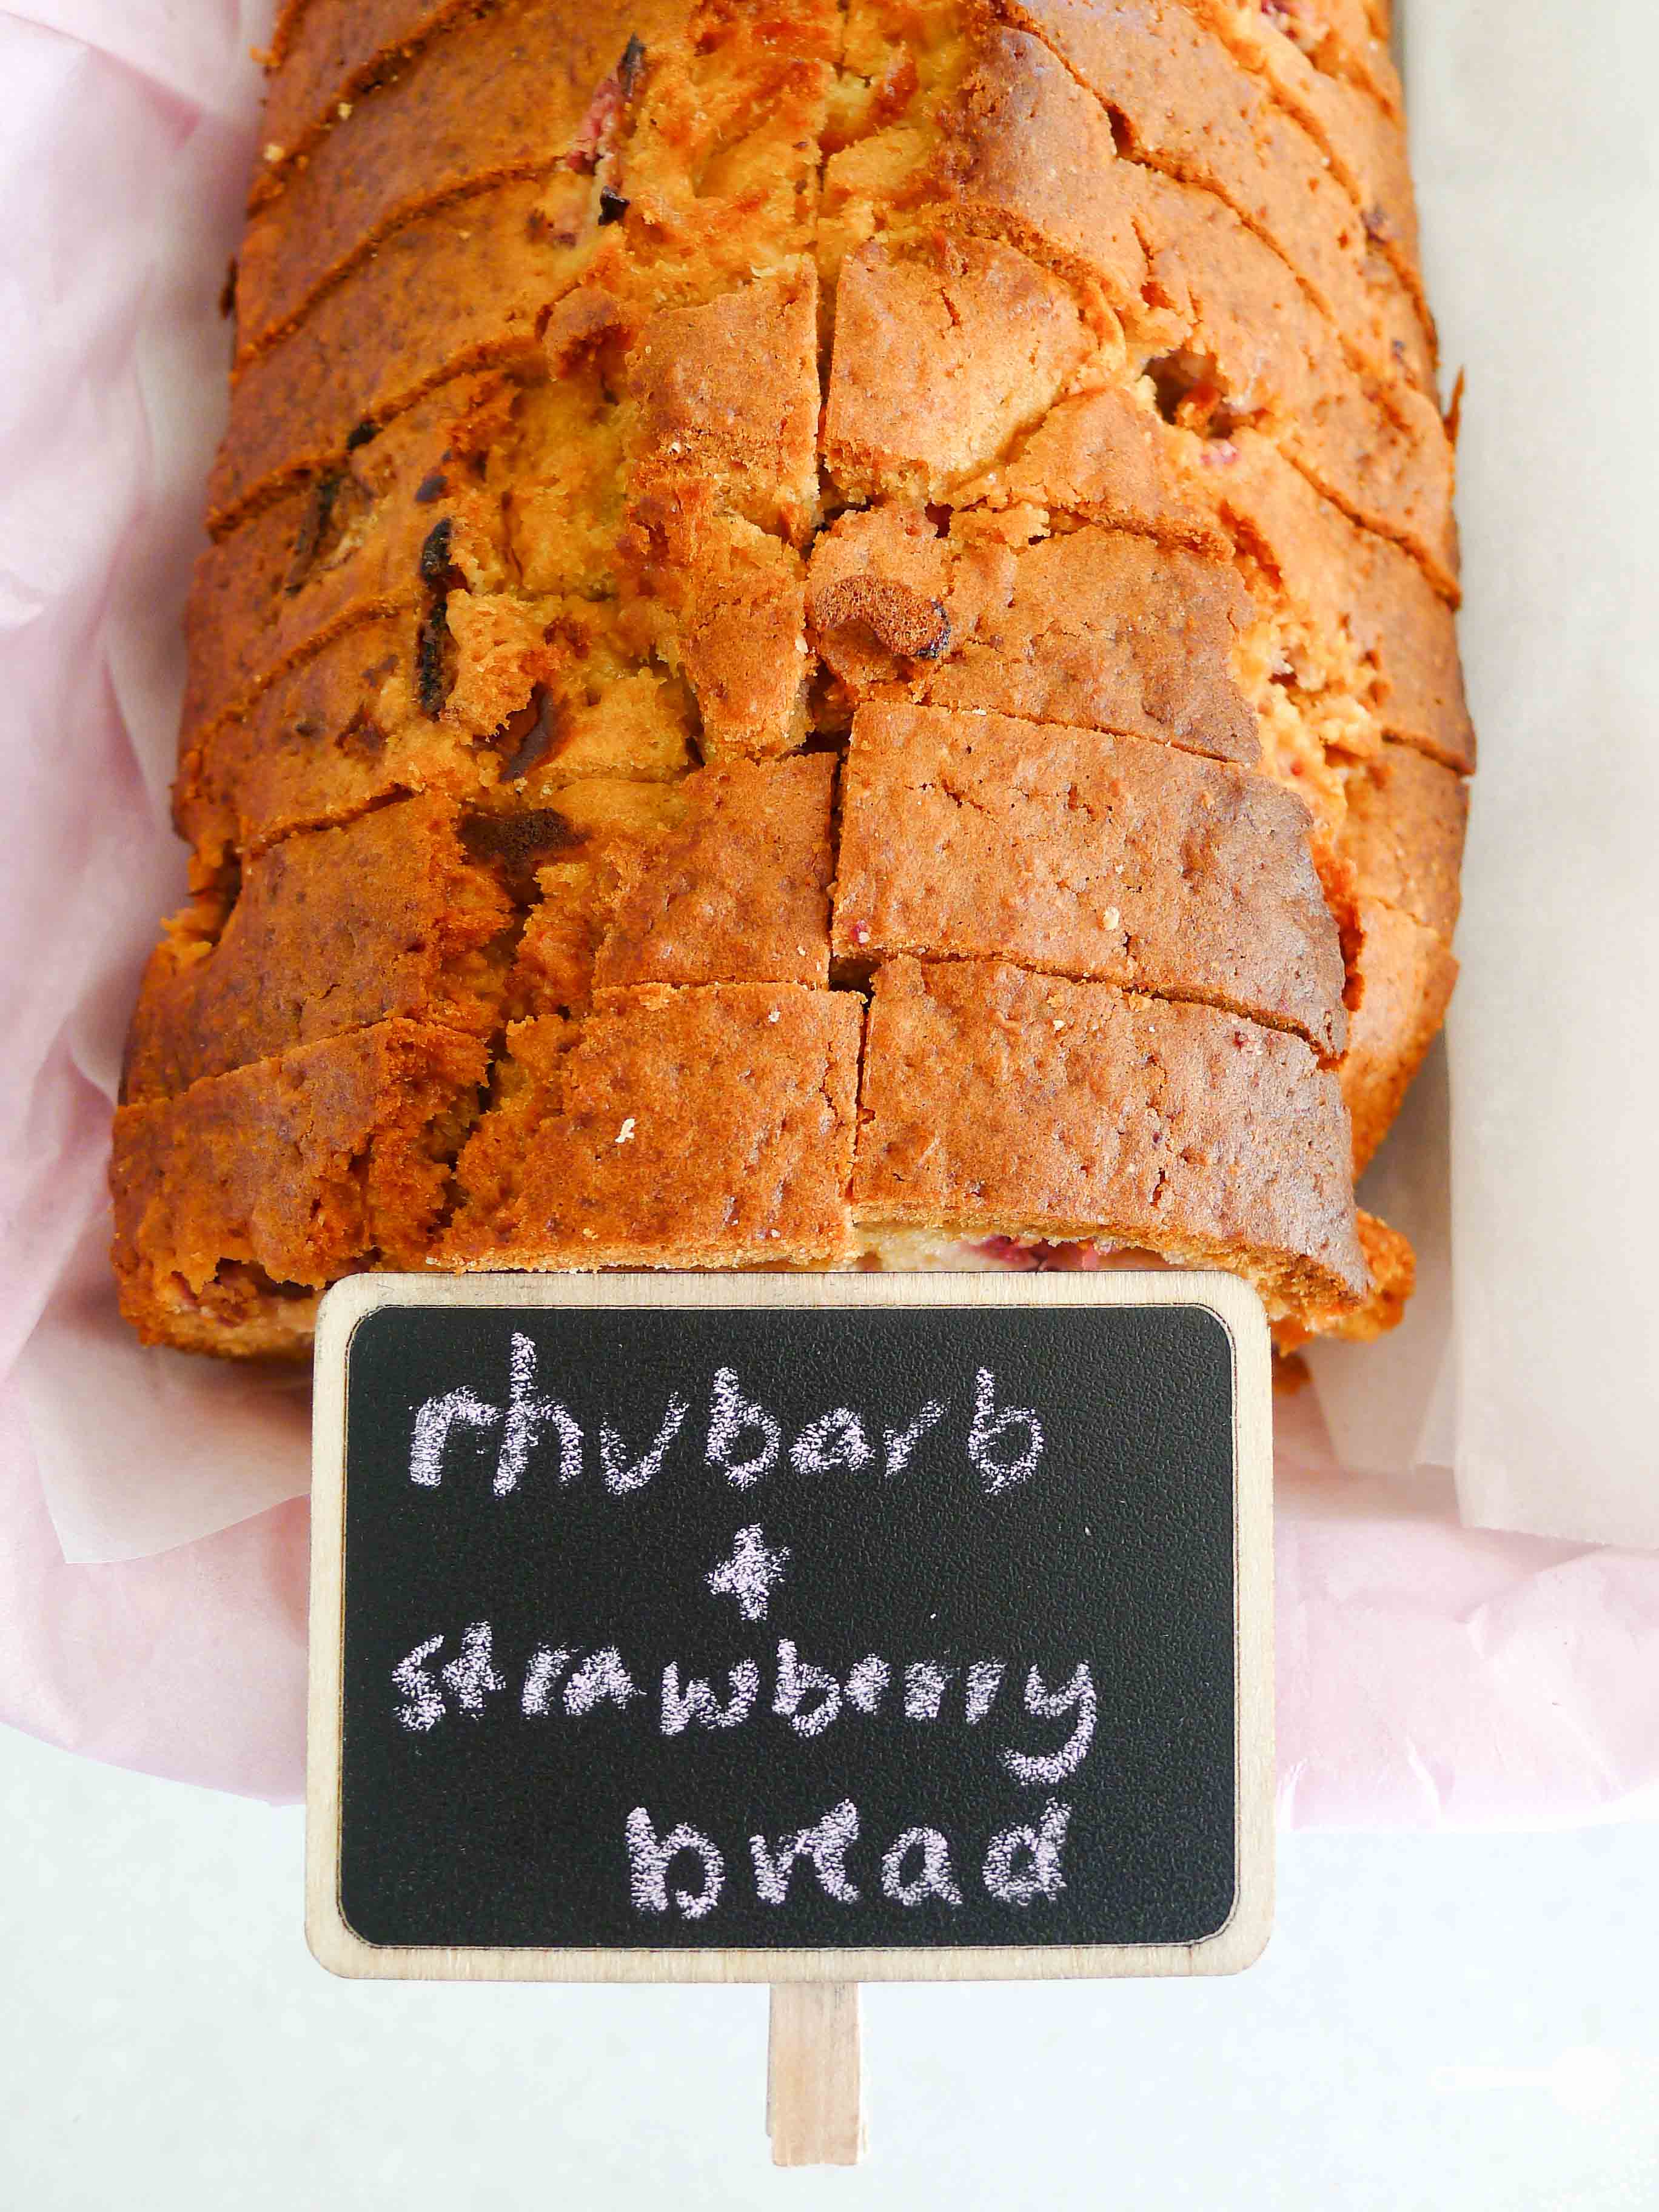 Rhubarb and Strawberry Loaf (dairy free)